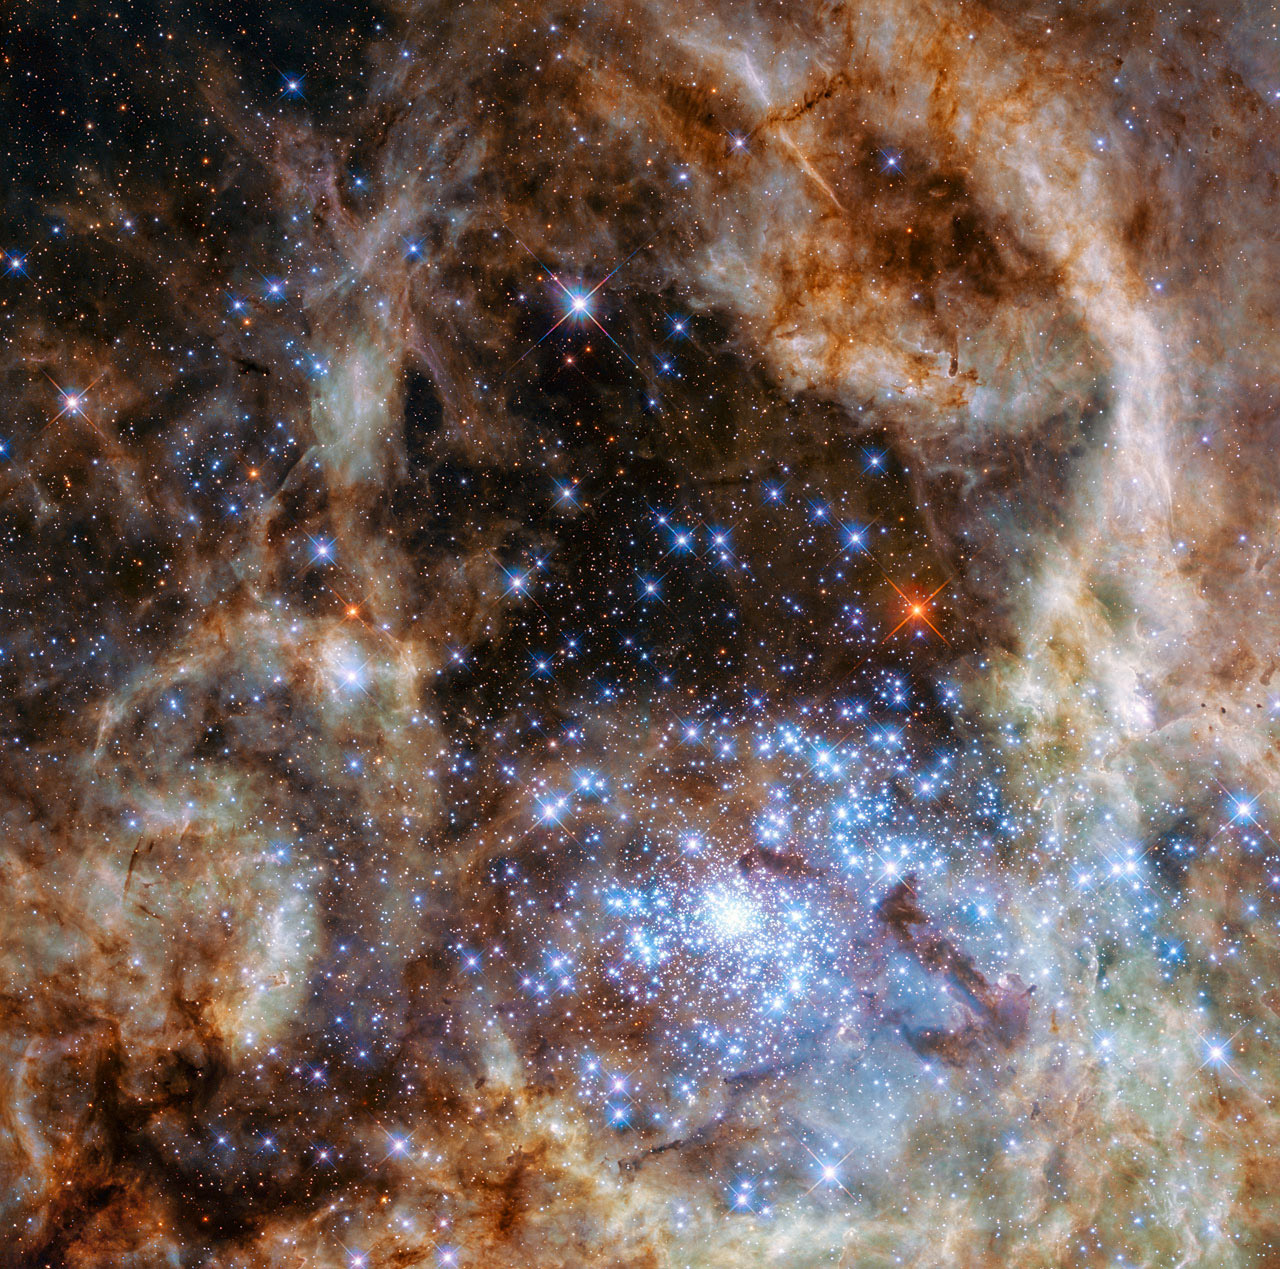 This Hubble image shows the central region of the Tarantula Nebula in the Large Magellanic Cloud. The young and dense star cluster R136 can be seen at the lower right of the image. This cluster contains hundreds of young blue stars, among them the most massive star detected in the universe so far. March 17, 2016.